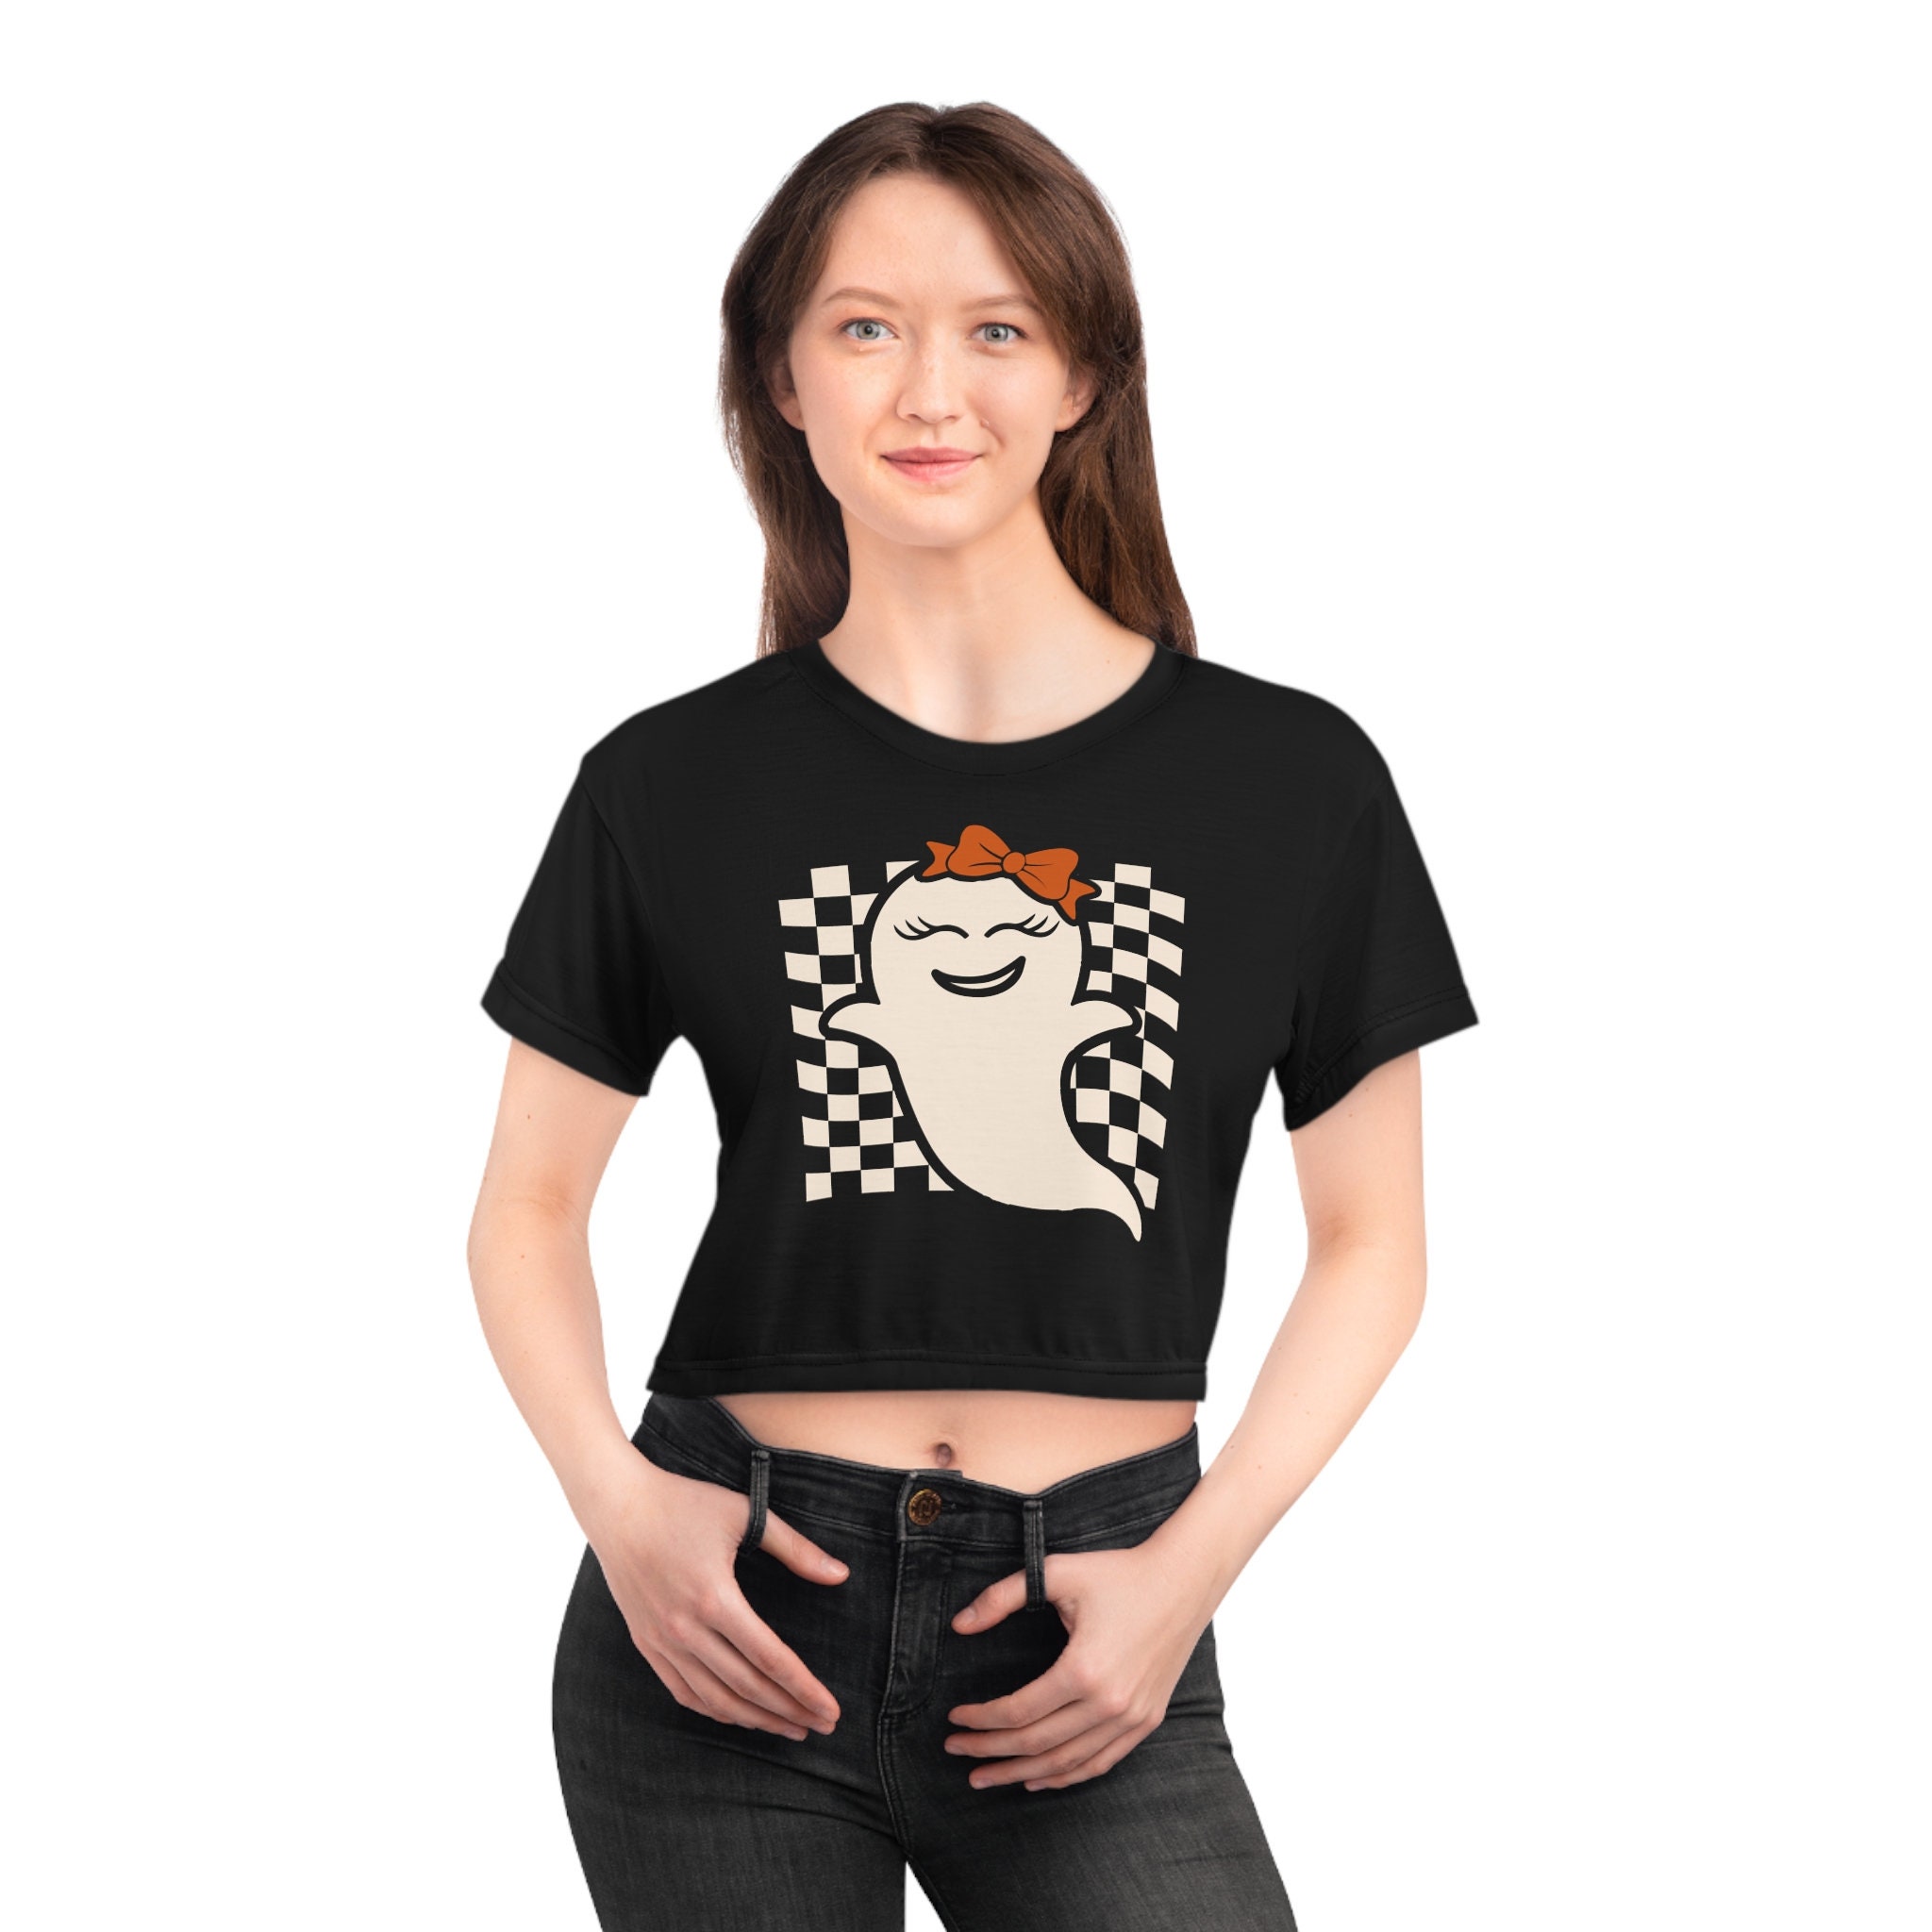 Discover Checkerboard Crop Tee with Cute Ghost